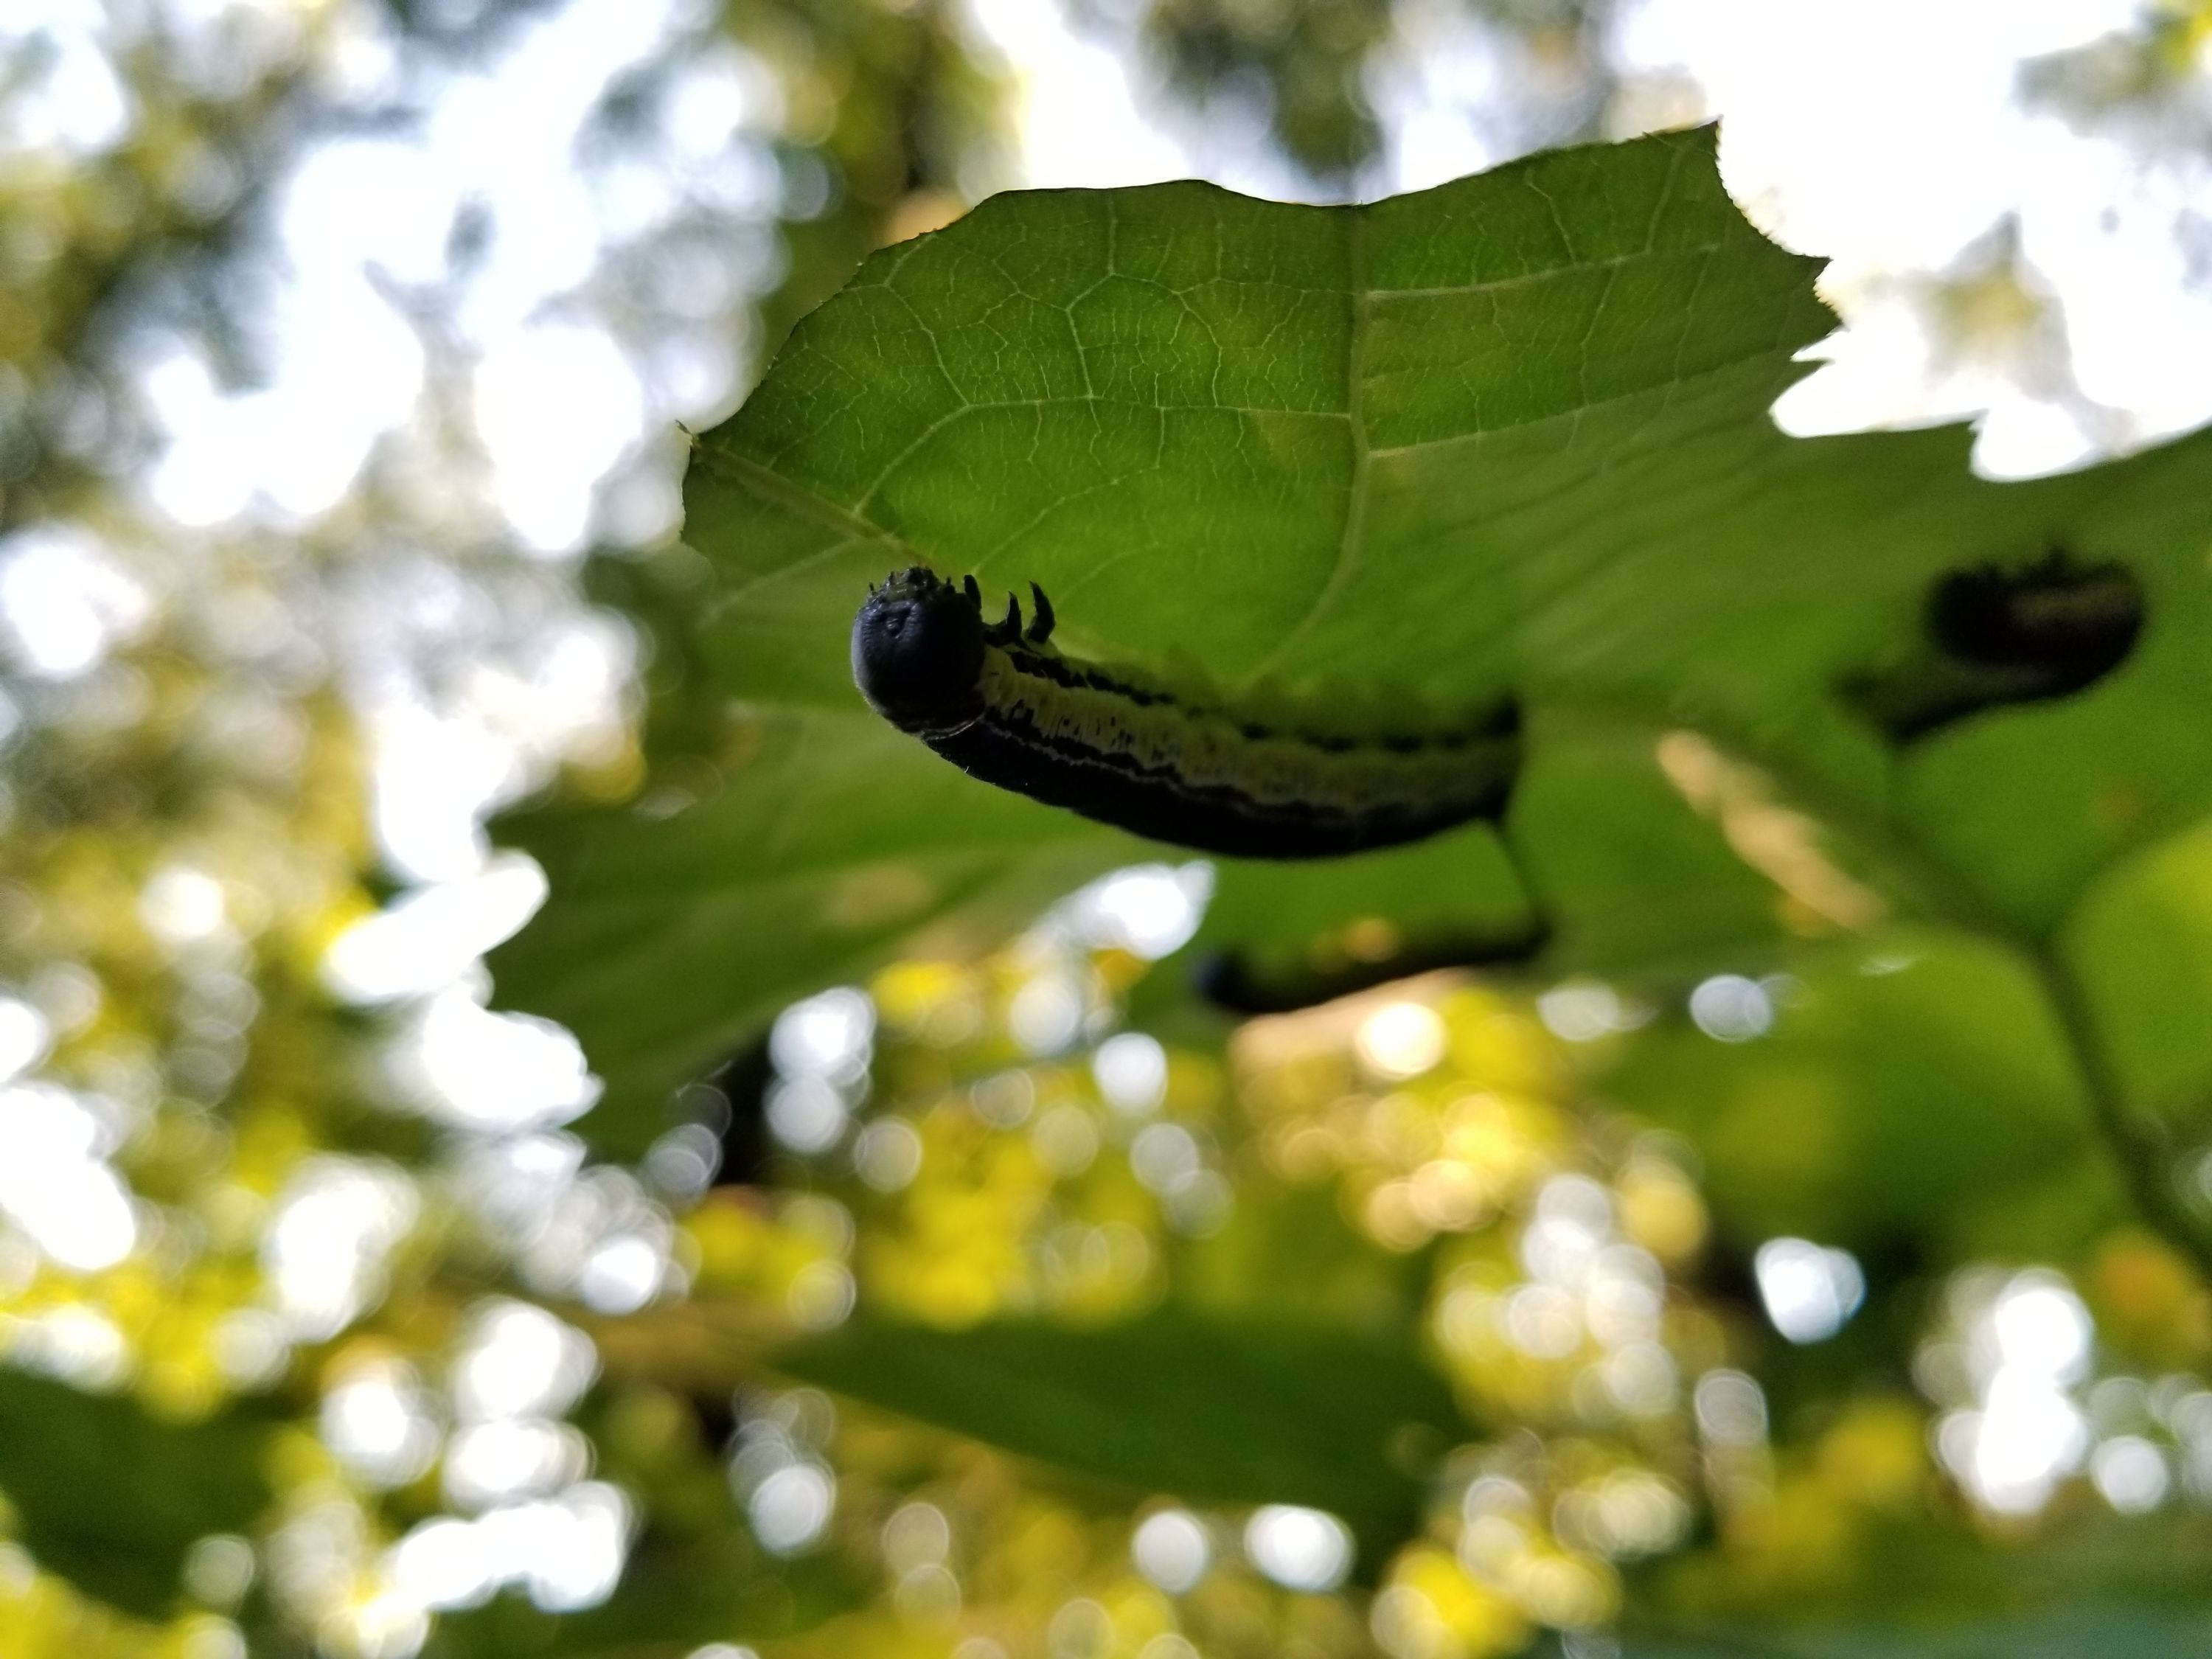 A hornworm on a leaf.